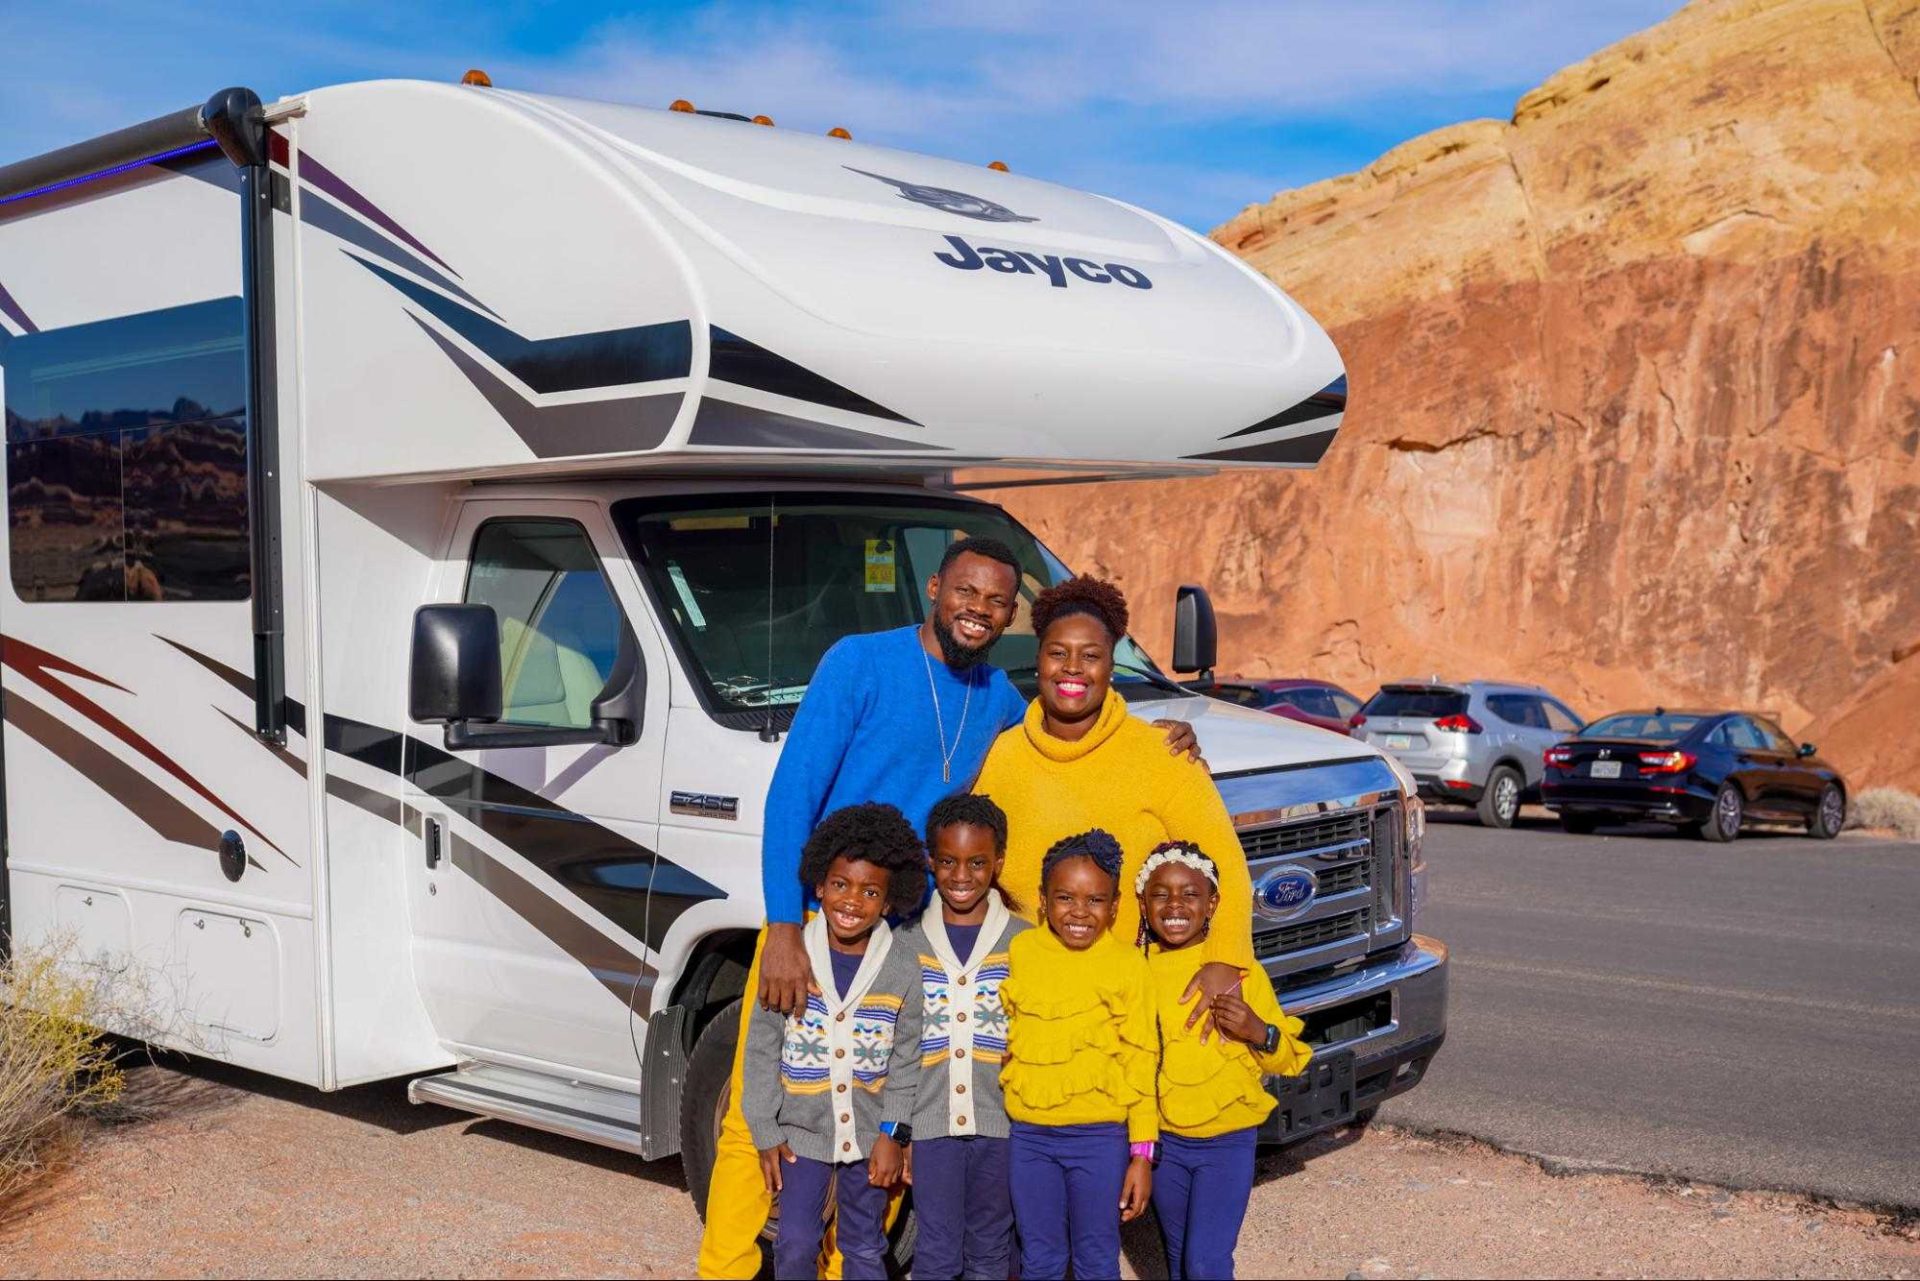 How To Go From Renting to Full-Time RVing with Kids